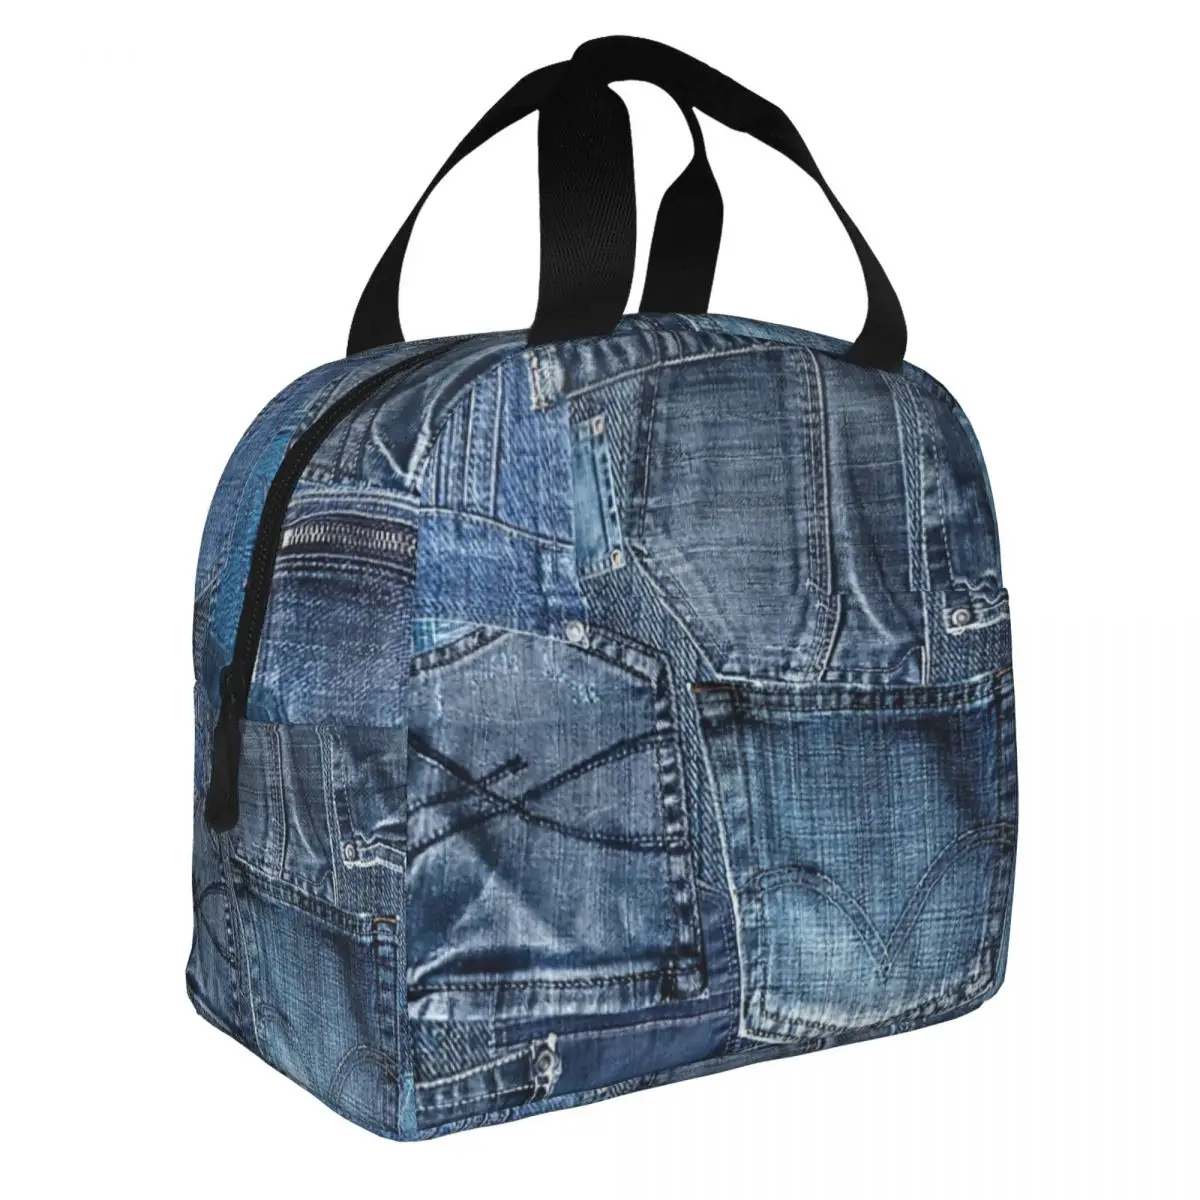 Blue Denim Jeans Pocket Patchwork Lunch Bento Bags Portable Aluminum Foil thickened Thermal Cloth Lunch Bag for Women Men Boy